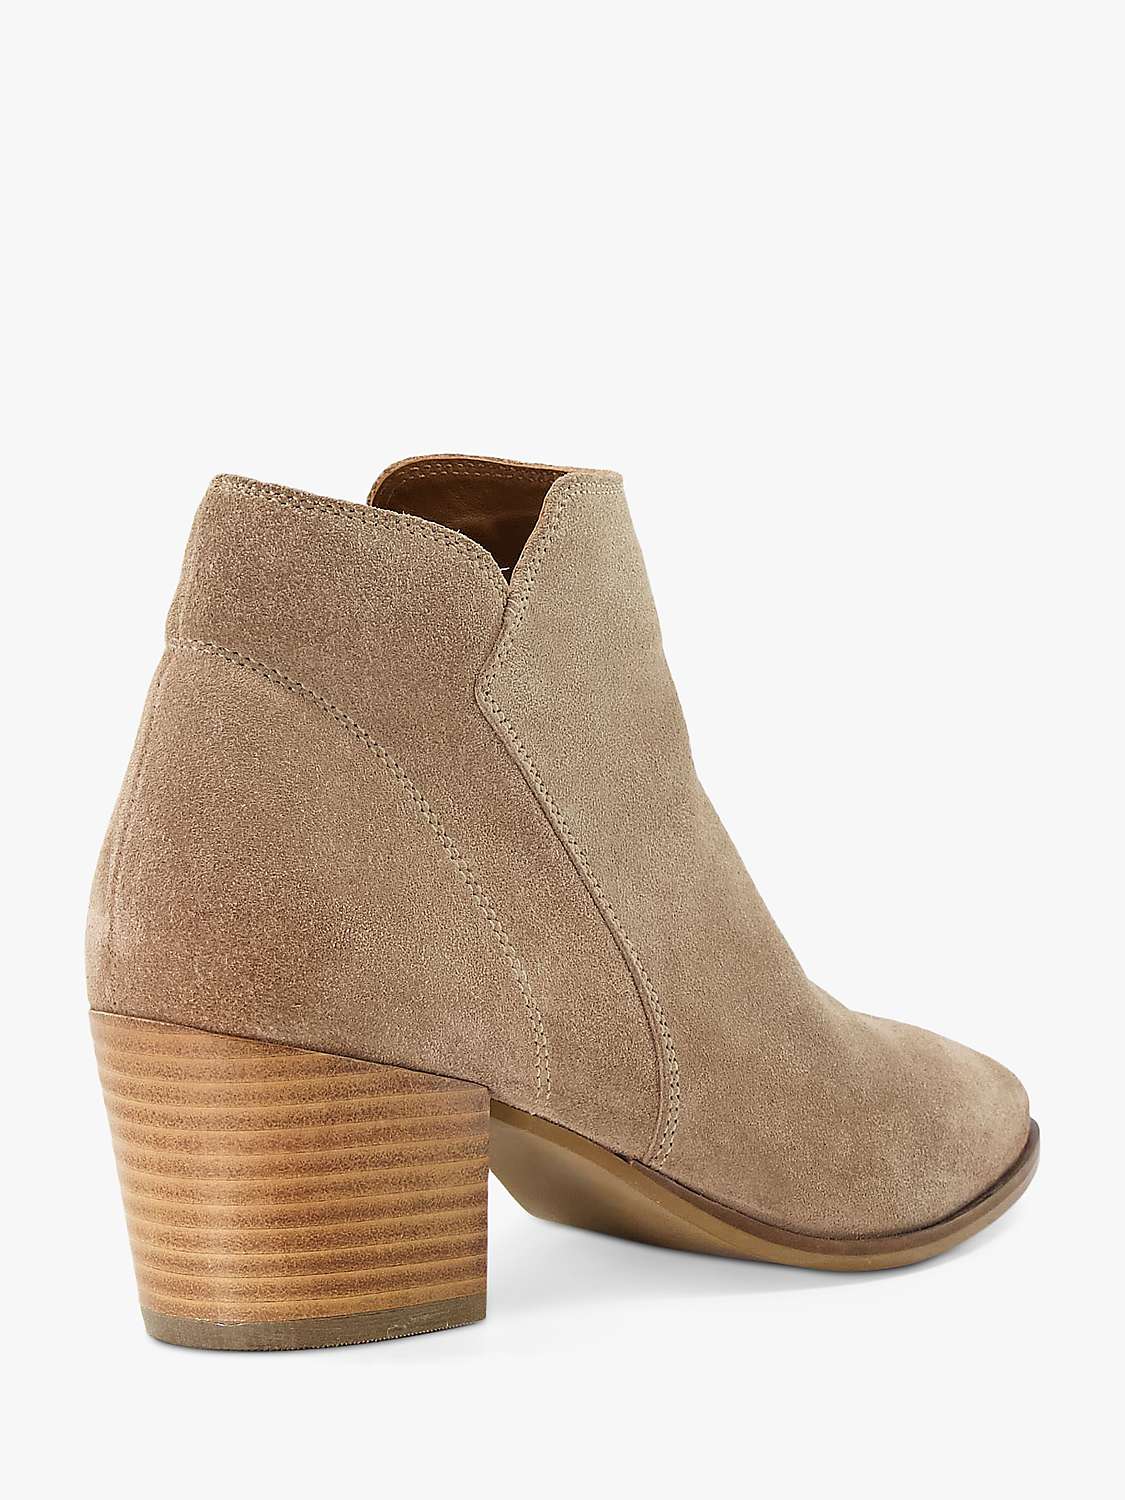 Buy Dune Parlor Suede Ankle Boots, Sand Online at johnlewis.com